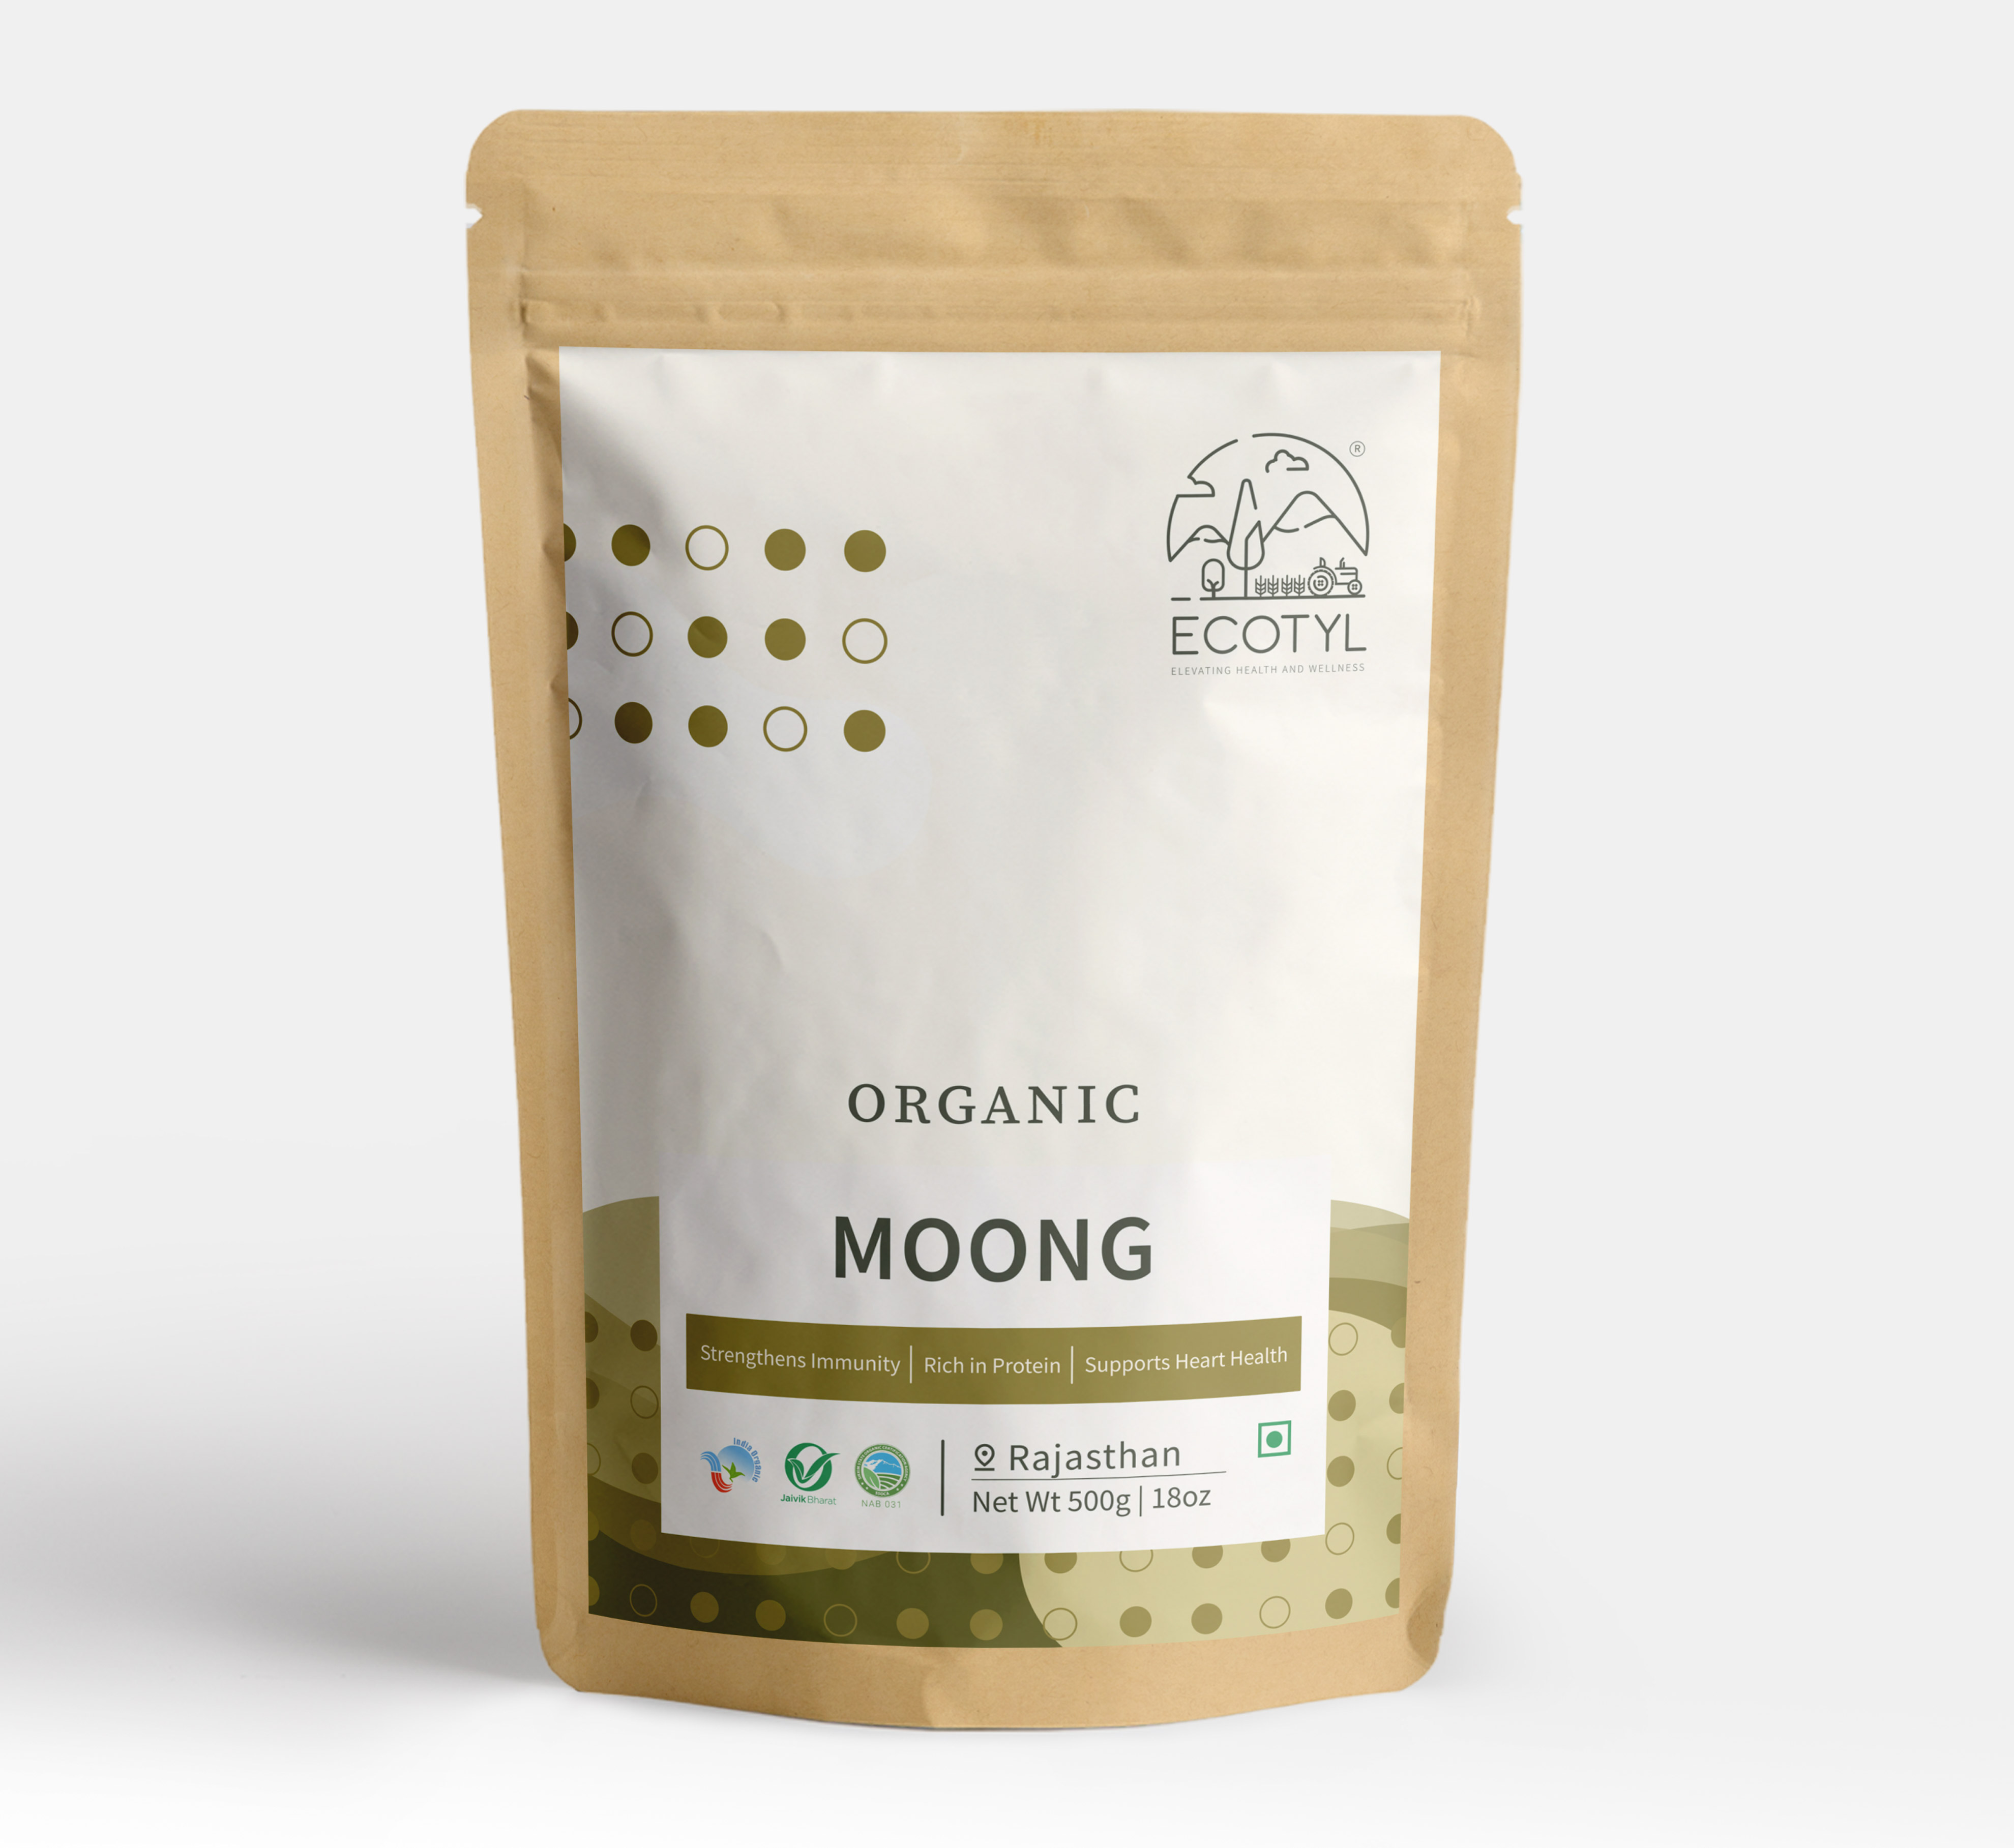 Buy Ecotyl Organic Moong - 500 g at Best Price Online